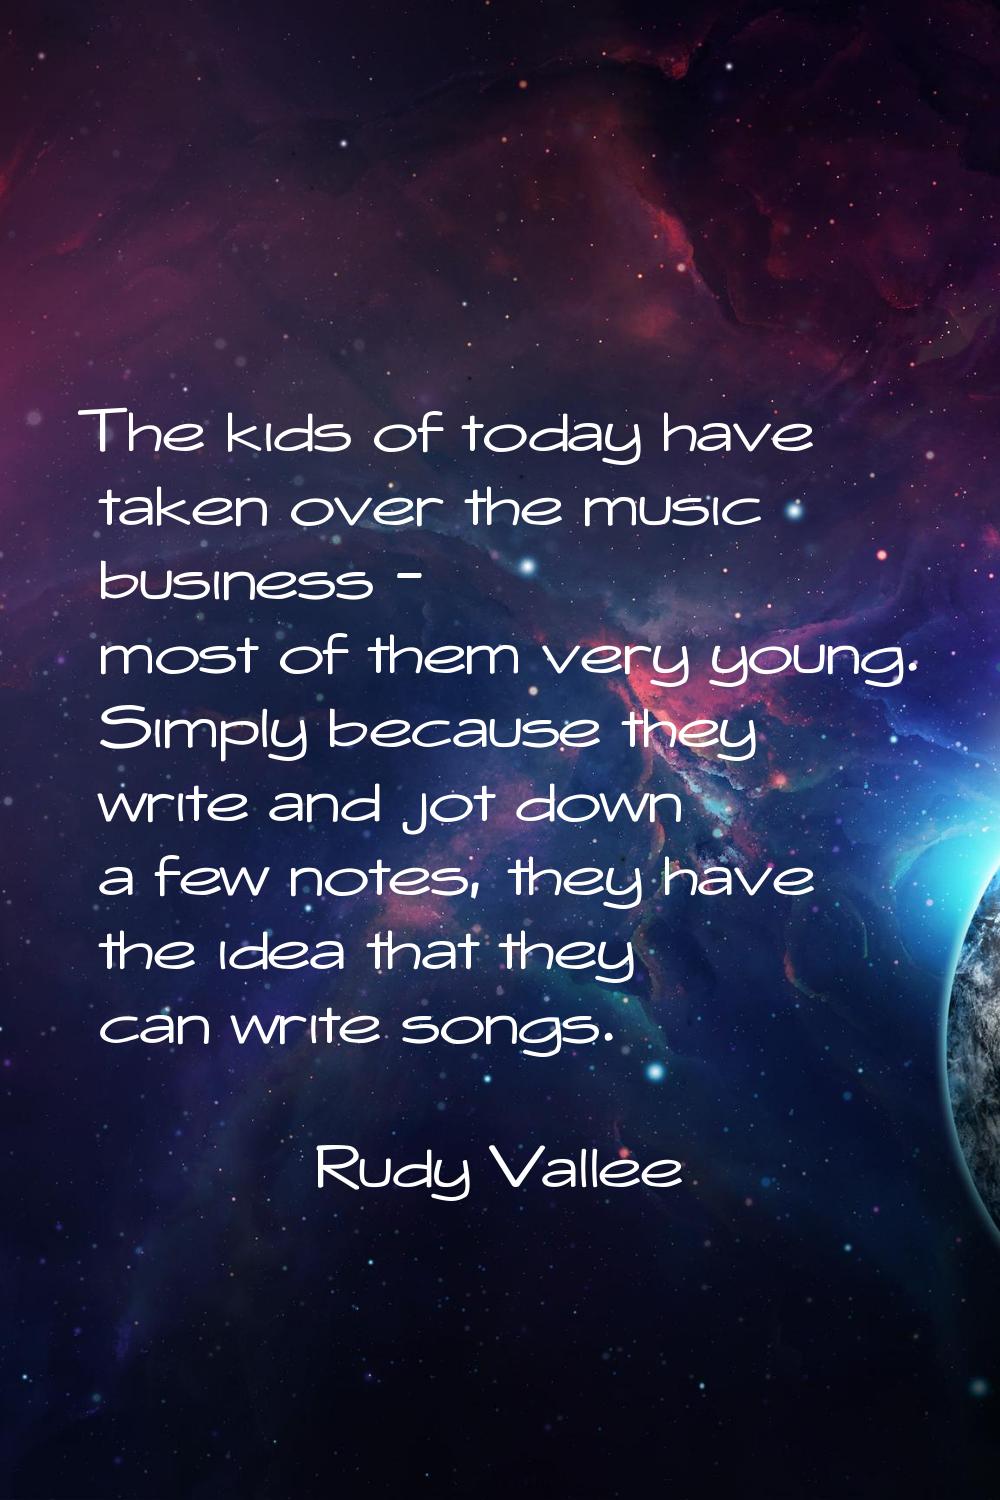 The kids of today have taken over the music business - most of them very young. Simply because they